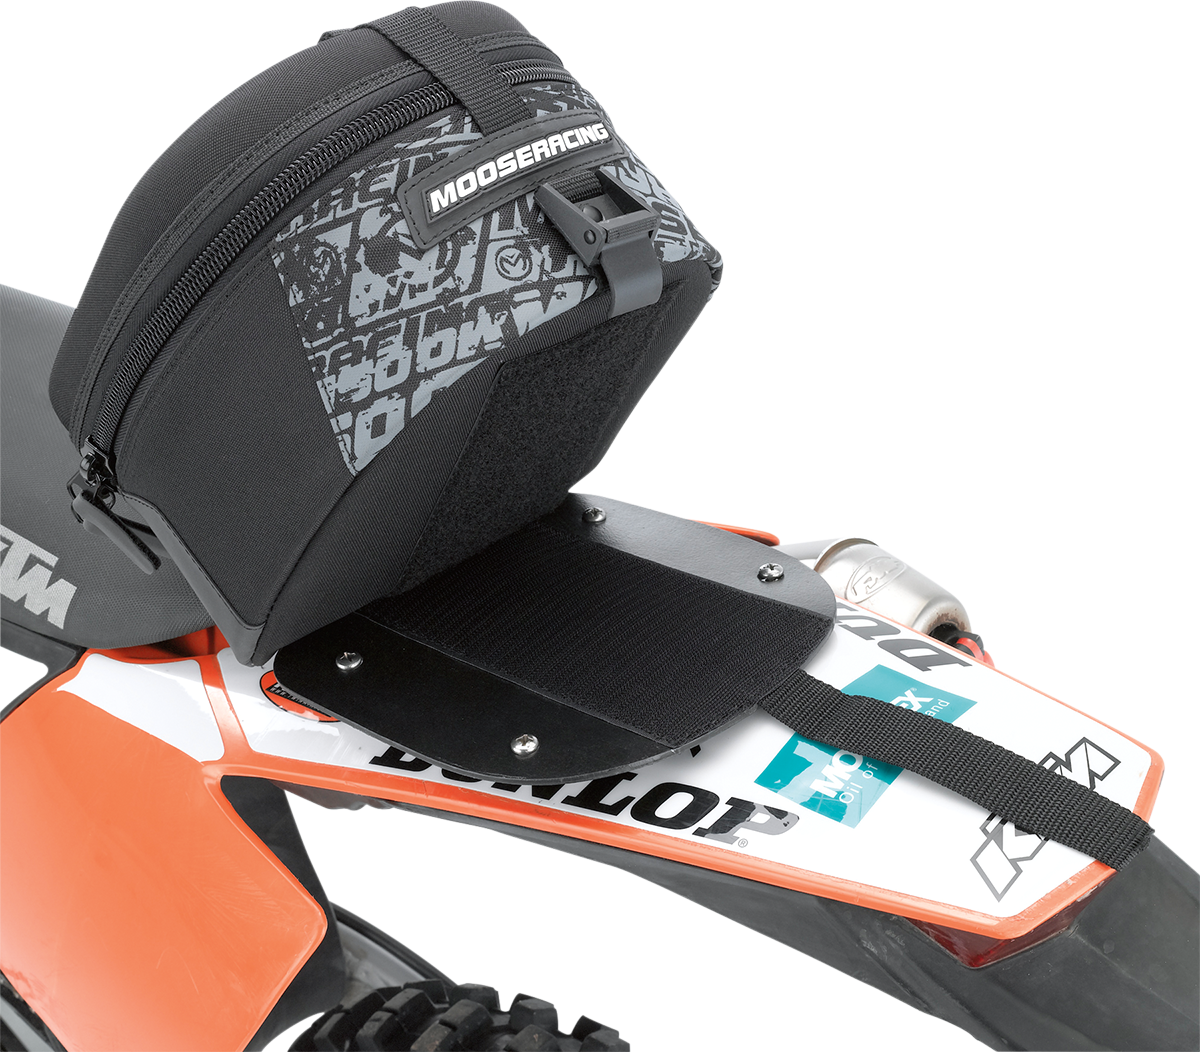 Main image of Moose Removable Rear Fender Pack